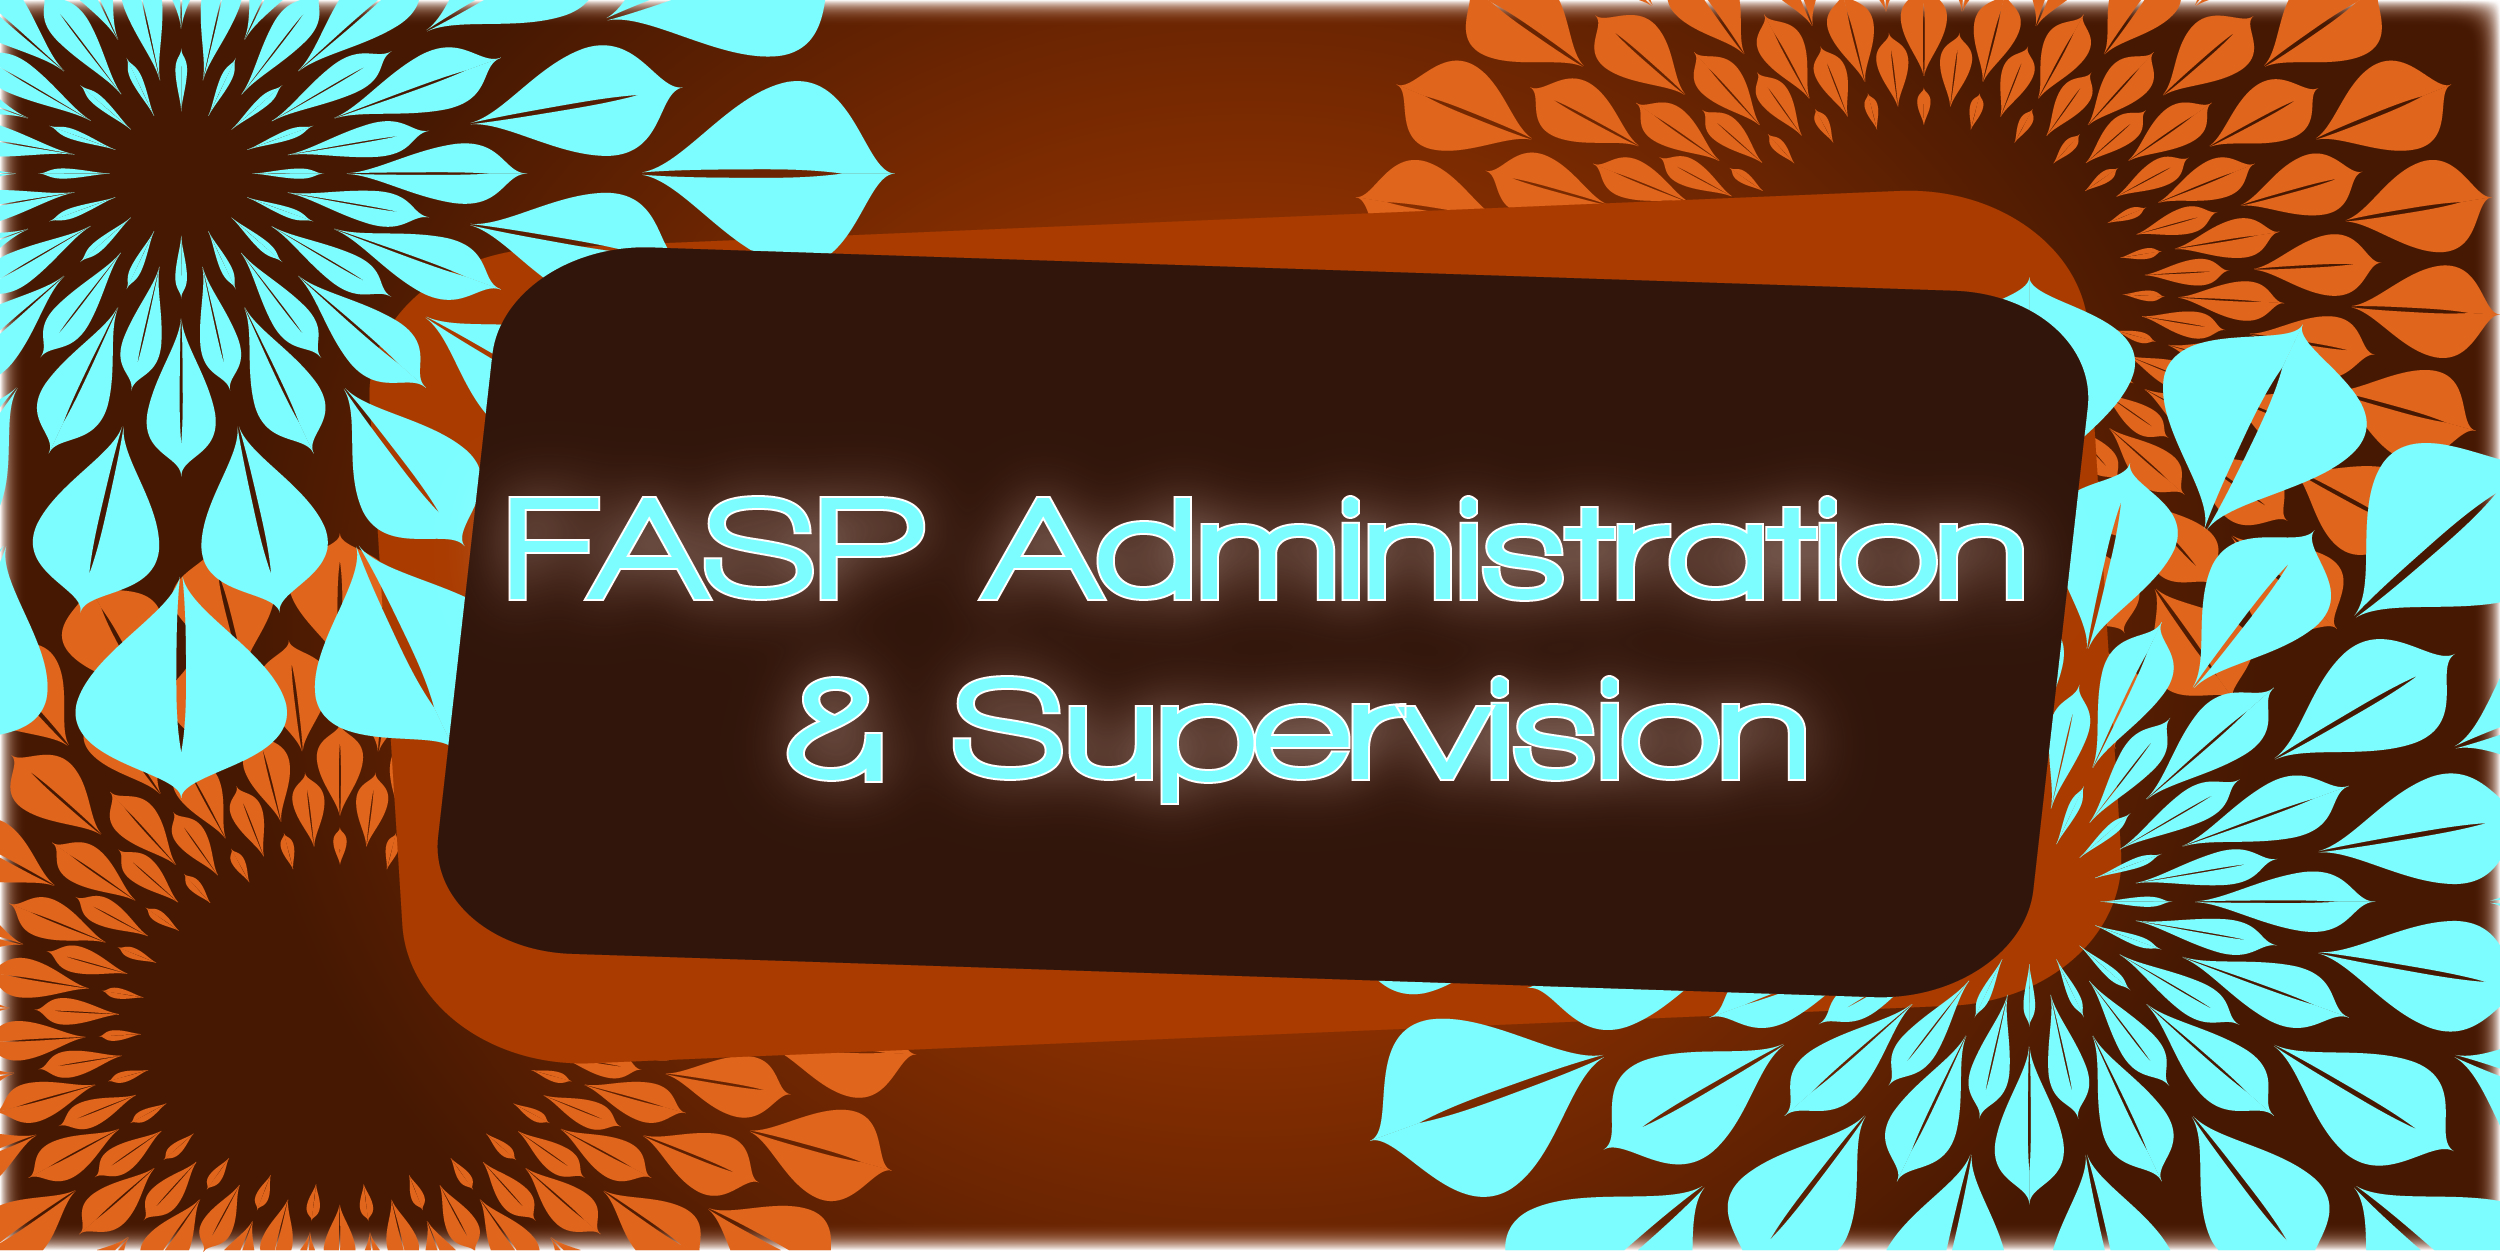 FASP Administration & Supervision